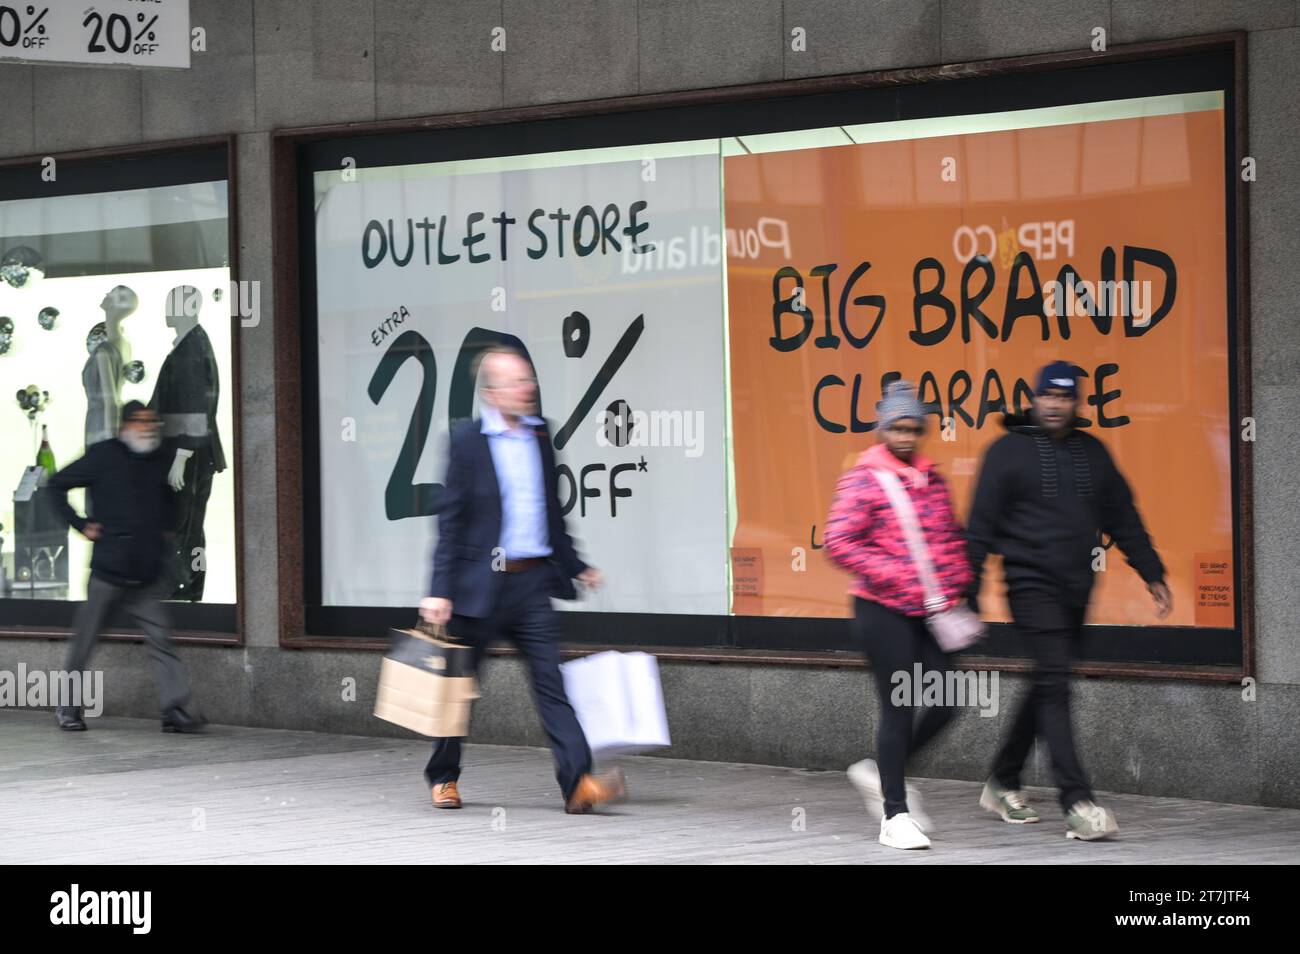 New Street, Birmingham November 16th 2023 - Sale posters in Birmingham city centre shops on the run-up to Black Friday. Pic by Credit: Stop Press Media/Alamy Live News Stock Photo